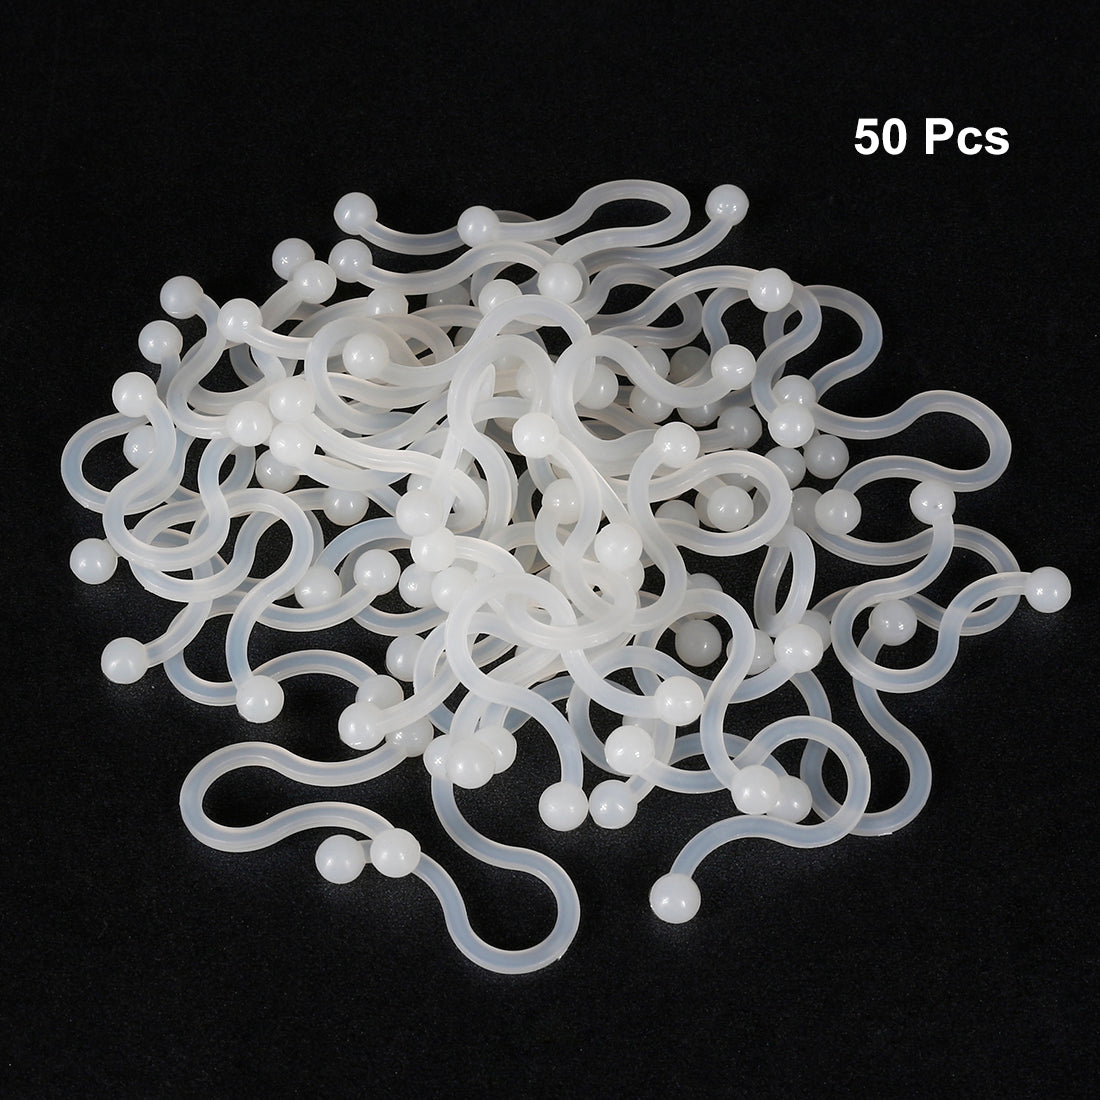 uxcell Uxcell 50pcs Twist Lock Cable Wire Ties Nylon U Shape Save Place 10.5mm Dia White